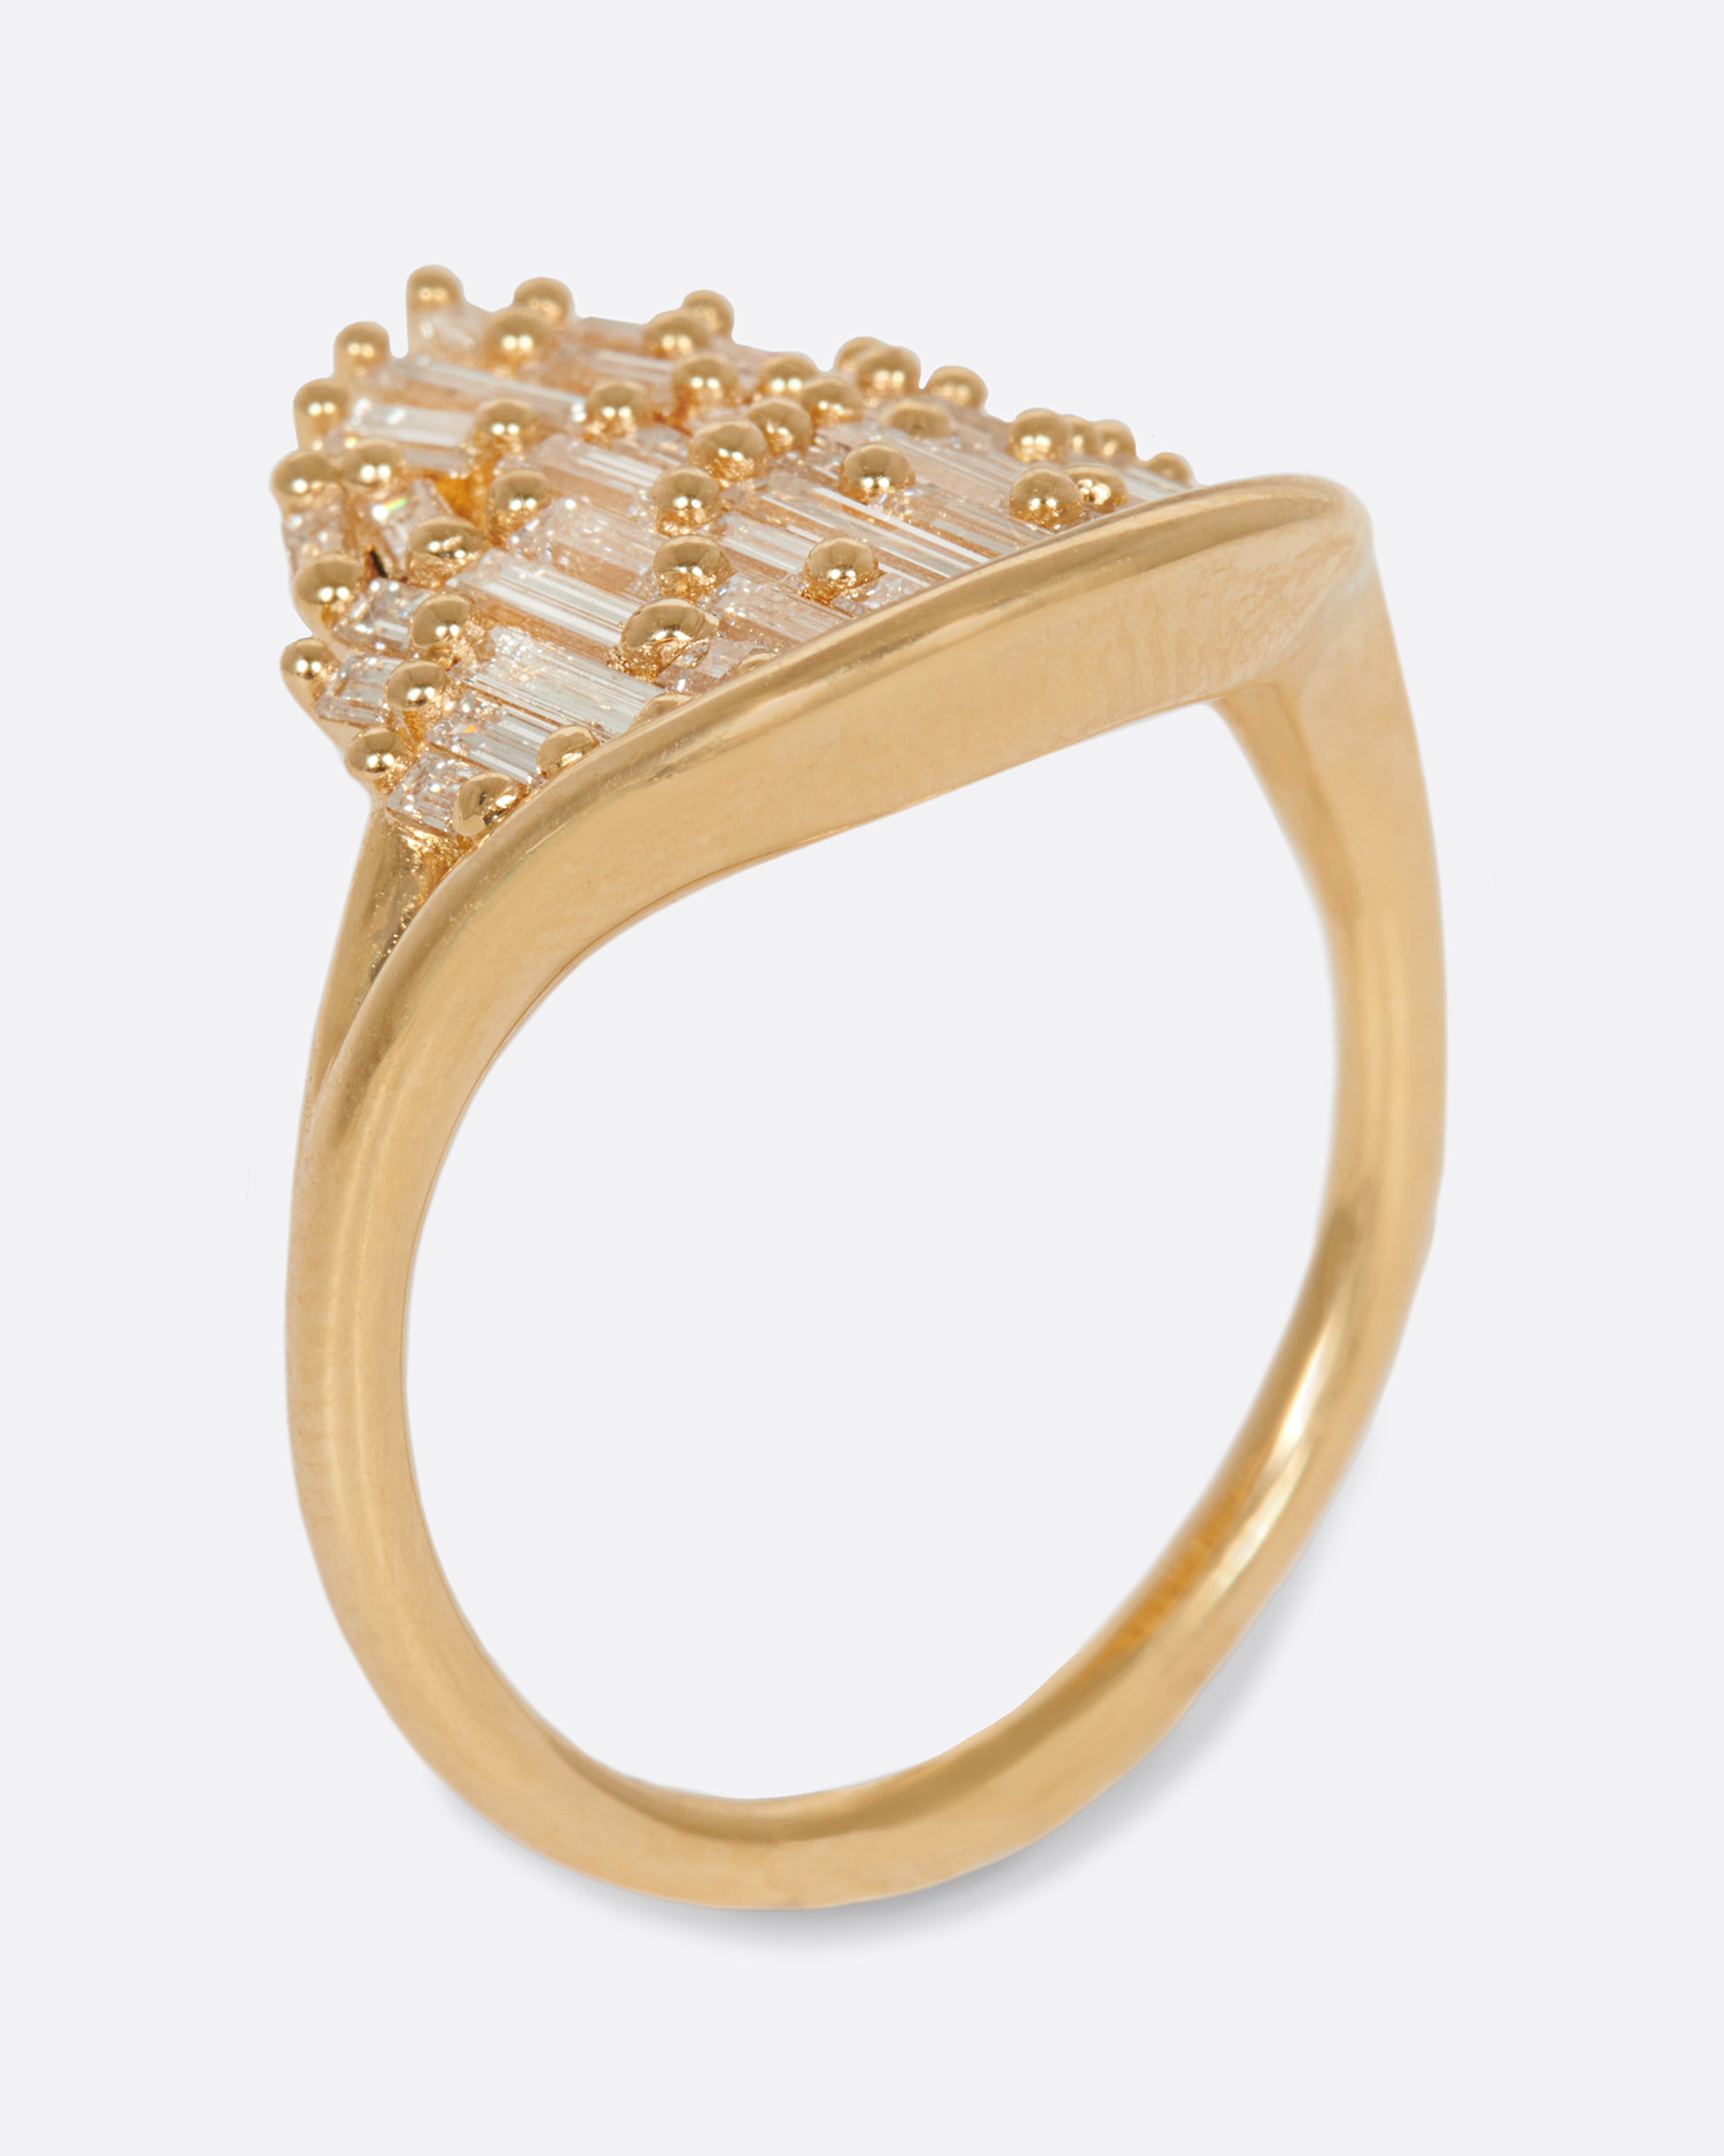 A semi-circular ring filled with diamond baguettes that grow slightly askew.